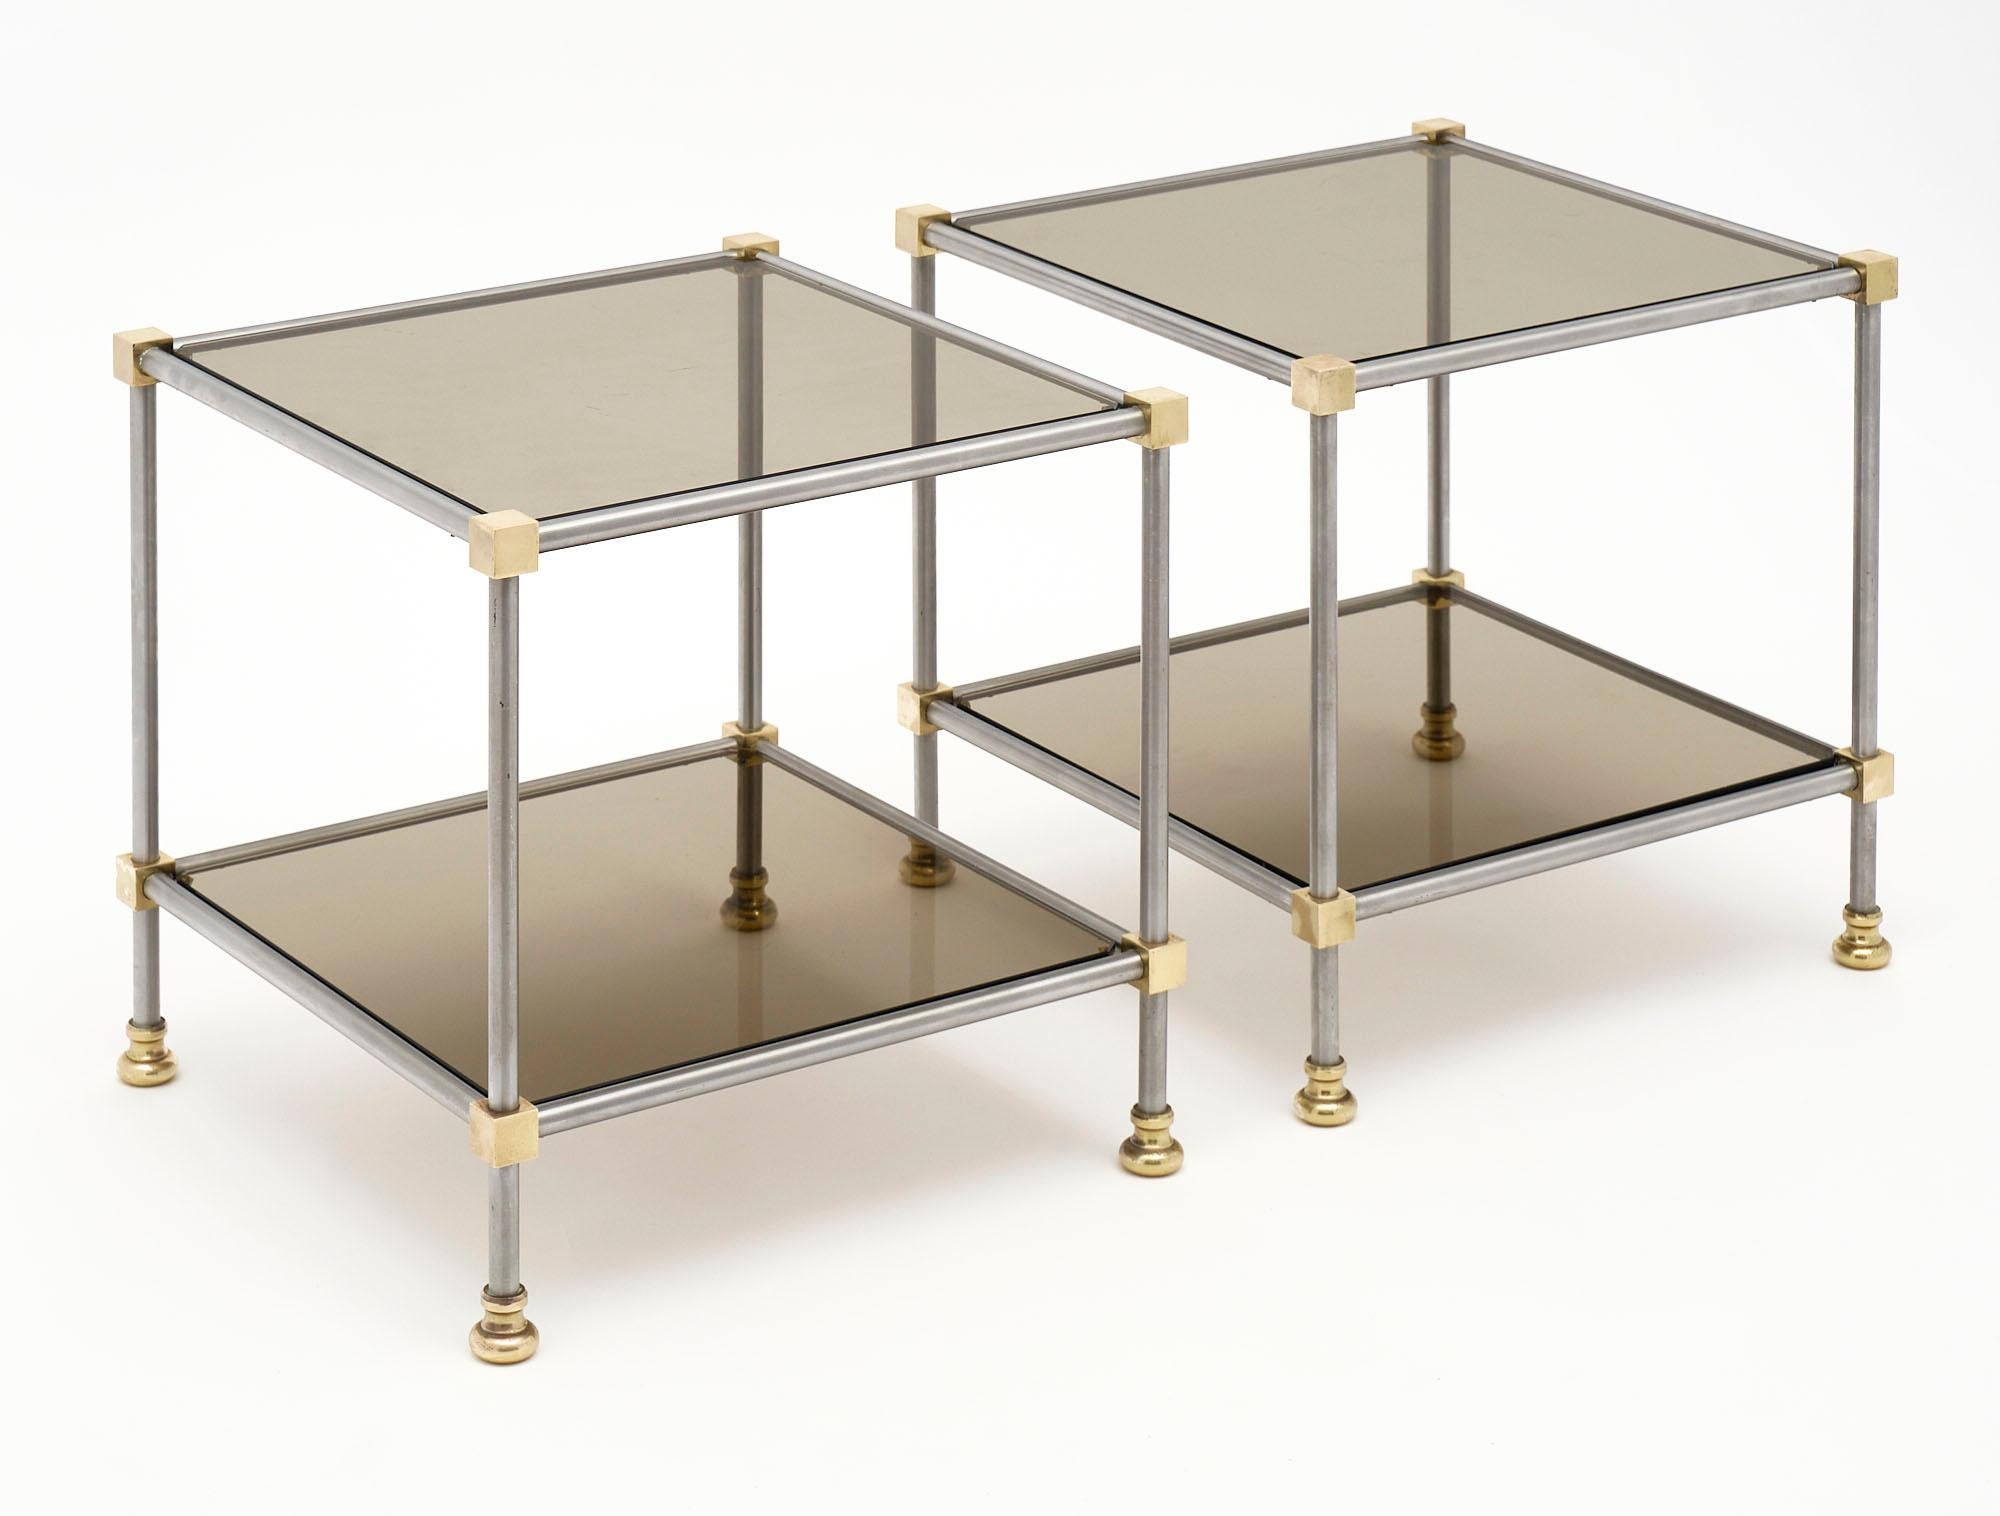 Pair of side tables from France made of steel and featuring brass cubic corners and brass feet. We love the smoked glass shelves and clean lines of this superb pair.